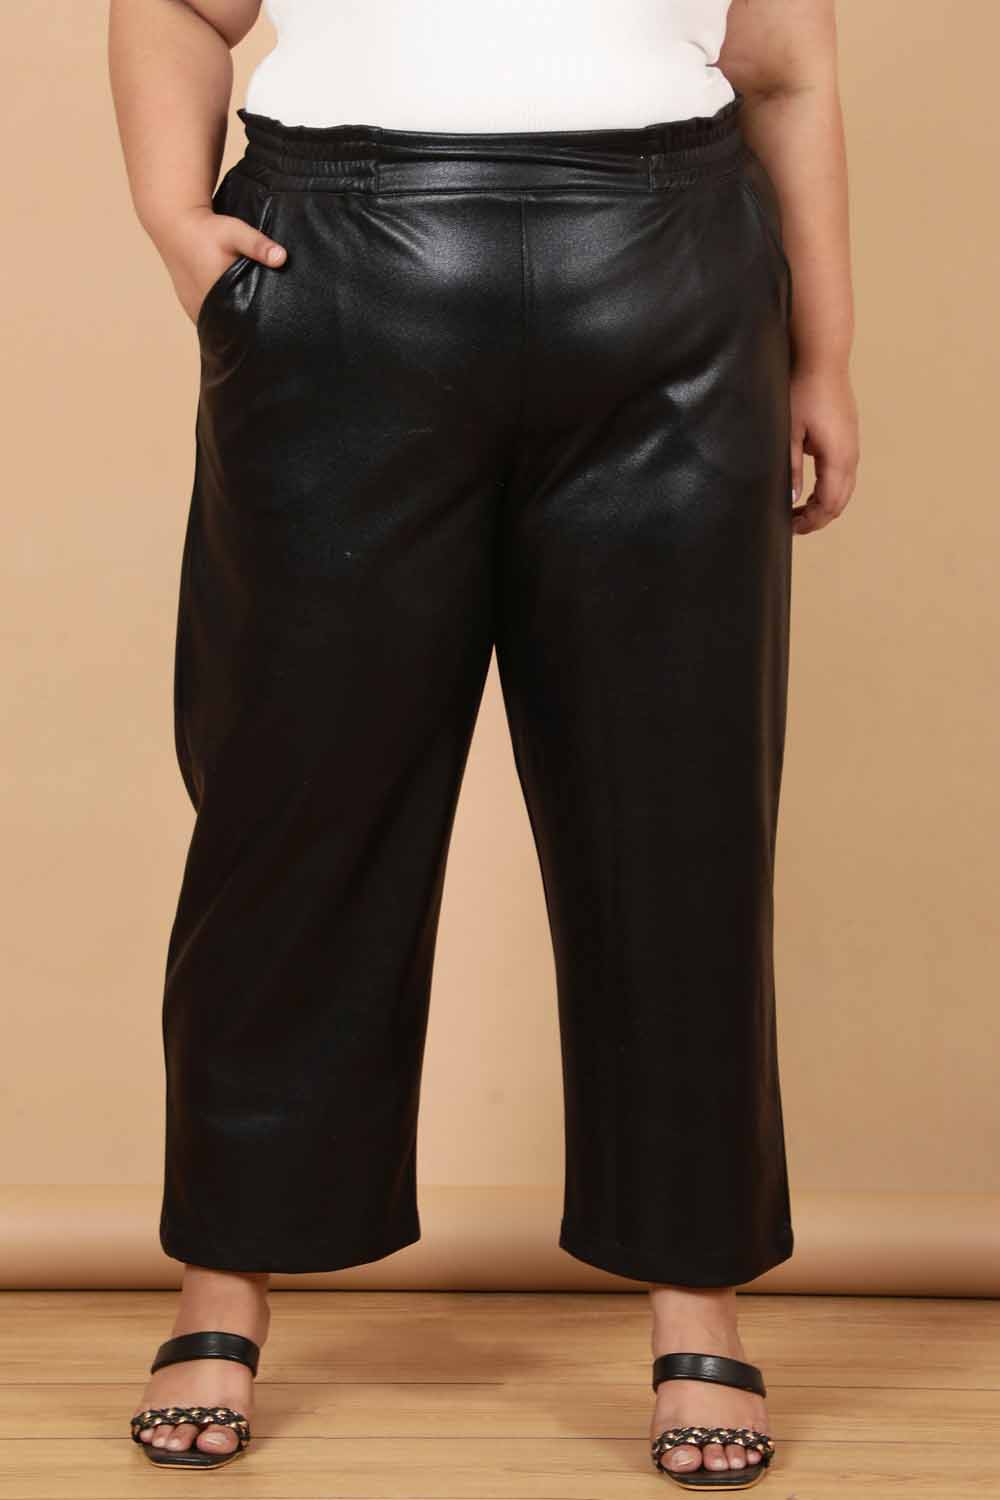 Buy Black Leather Pants In Plus Size For Women Online